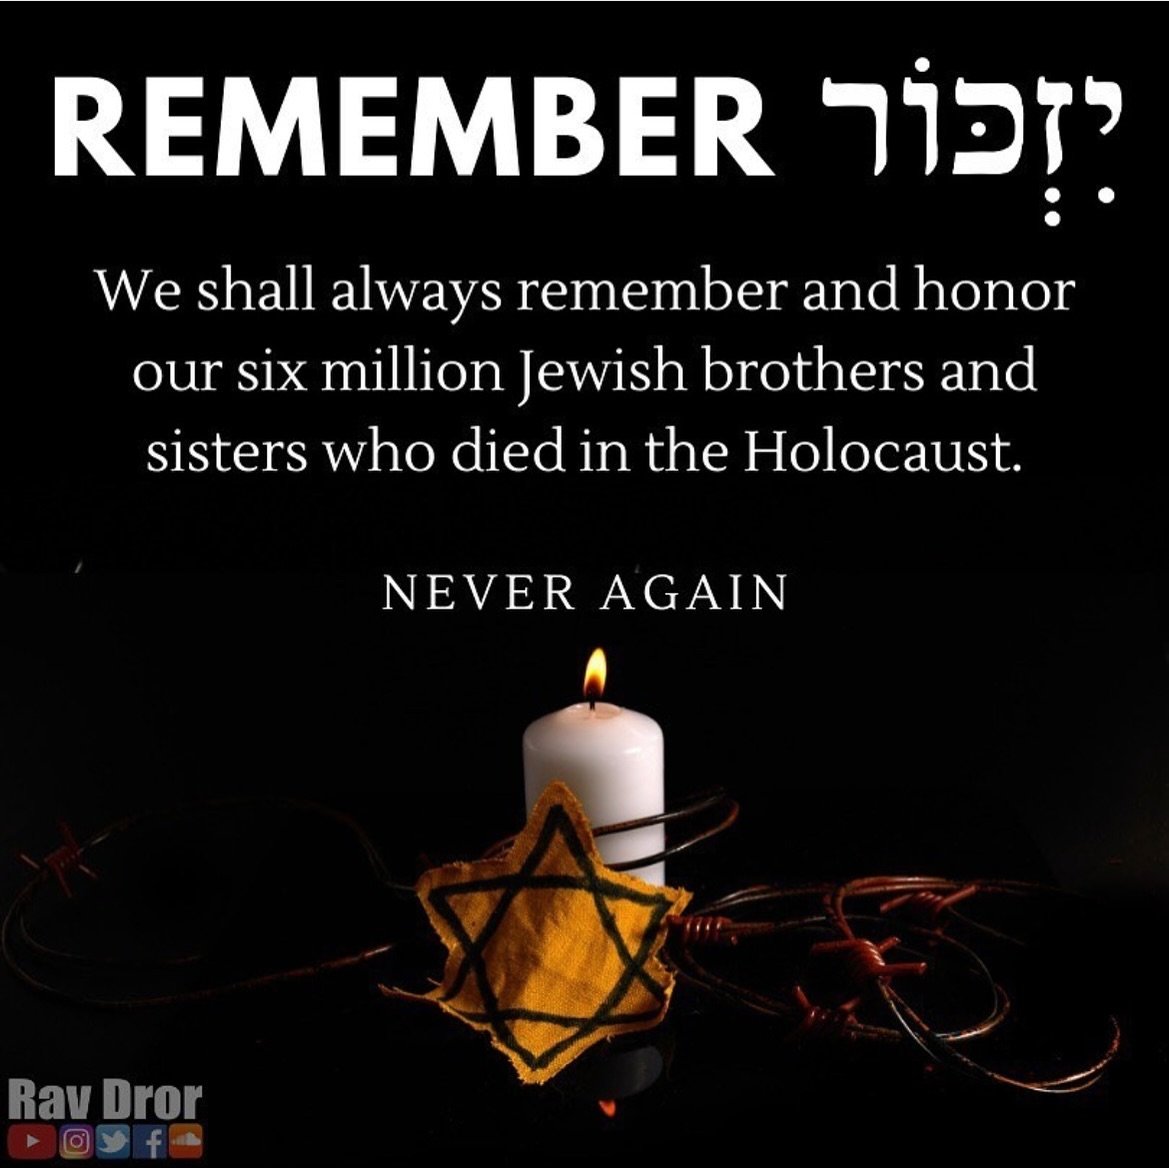 🕯️Tonight is Yom HaShoah, Holocaust Remembrance Day. Let&rsquo;s honor the memory of the six million Jews who perished in the Holocaust by lighting a candle. Their lives were brutally extinguished, but their light continues to shine upon us even in 